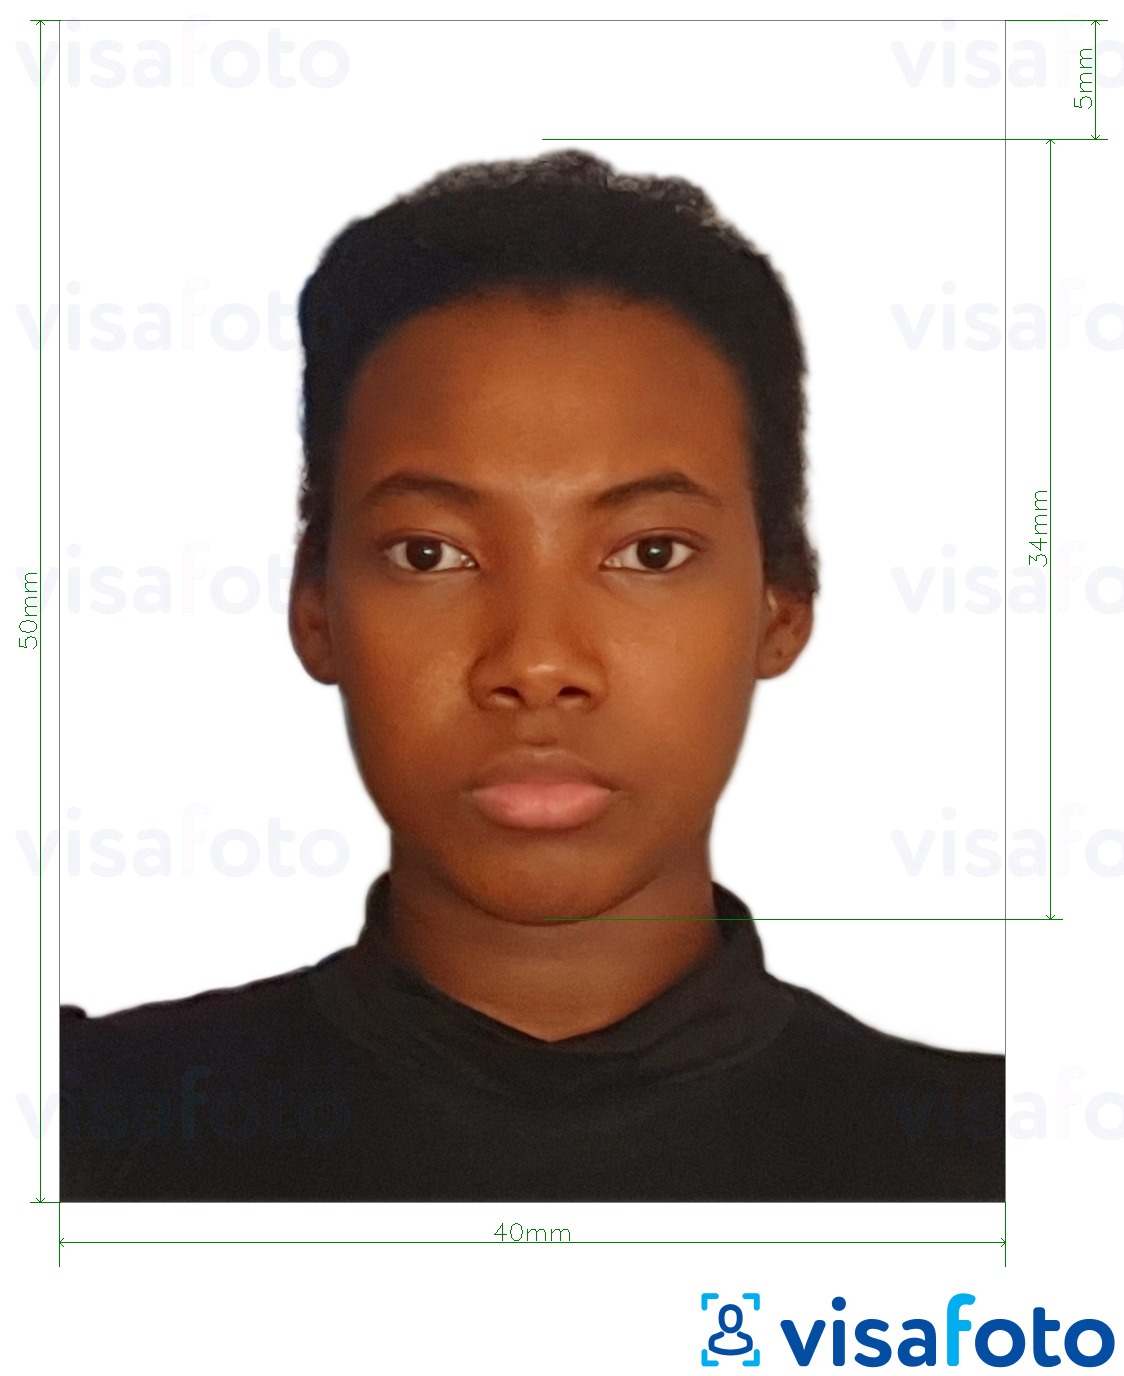 Example of photo for Cameroon passport 4x5 cm (40x50 mm) with exact size specification